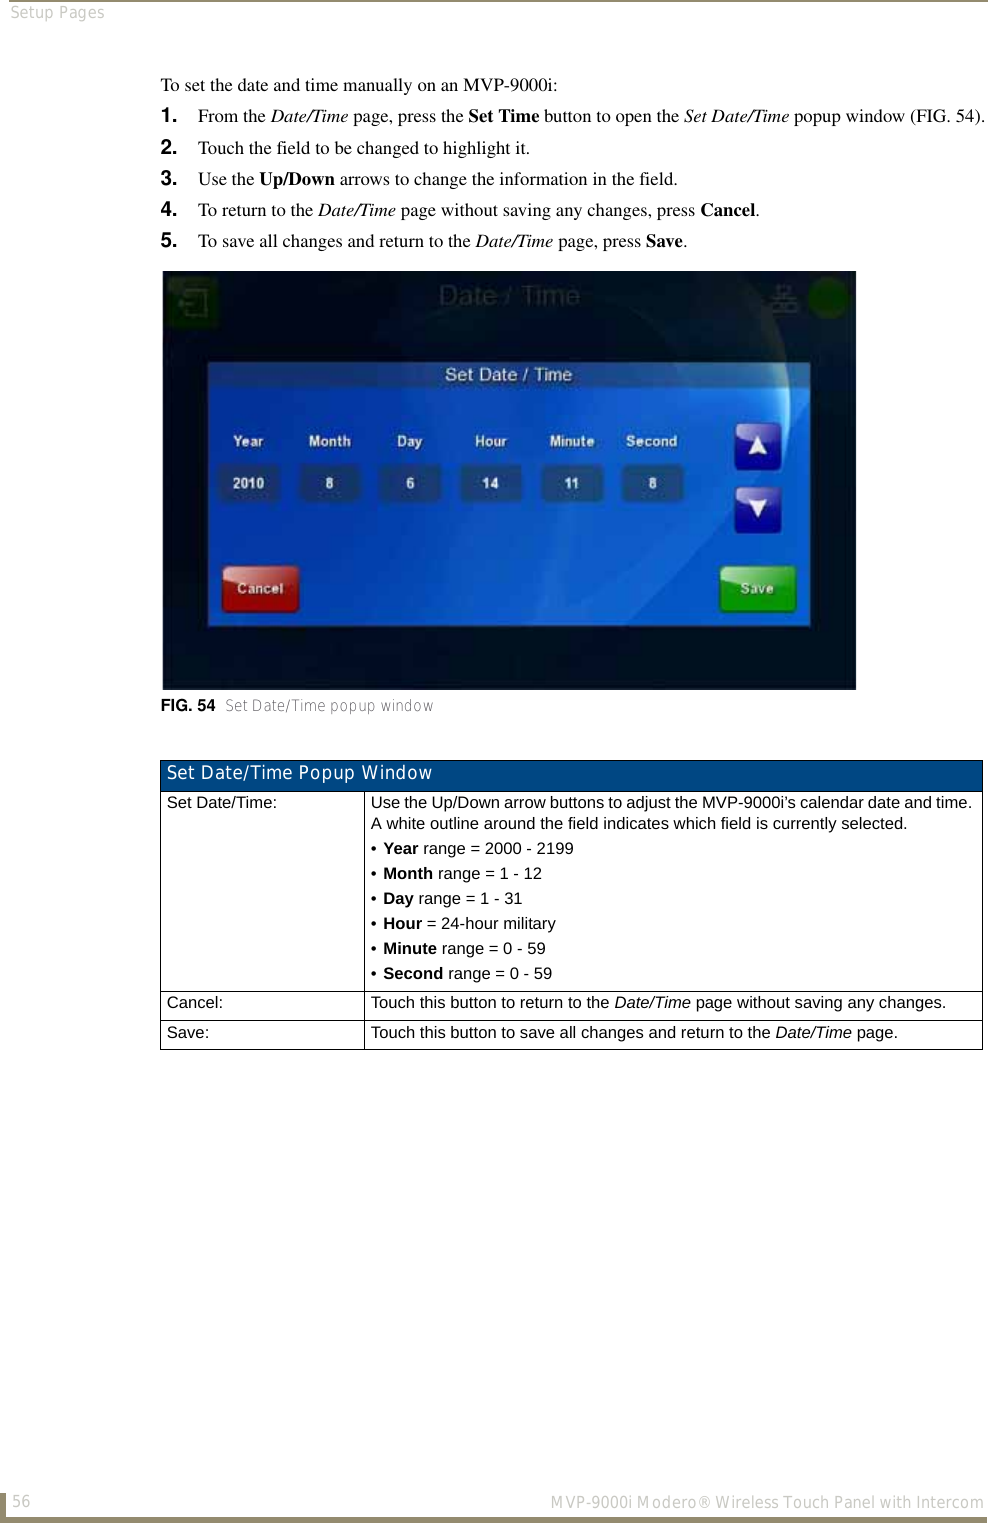 Setup Pages56  MVP-9000i Modero® Wireless Touch Panel with IntercomTo set the date and time manually on an MVP-9000i:1. From the Date/Time page, press the Set Time button to open the Set Date/Time popup window (FIG. 54).2. Touch the field to be changed to highlight it.3. Use the Up/Down arrows to change the information in the field.4. To return to the Date/Time page without saving any changes, press Cancel.5. To save all changes and return to the Date/Time page, press Save.FIG. 54  Set Date/Time popup windowSet Date/Time Popup WindowSet Date/Time: Use the Up/Down arrow buttons to adjust the MVP-9000i’s calendar date and time. A white outline around the field indicates which field is currently selected.•Year range = 2000 - 2199•Month range = 1 - 12•Day range = 1 - 31•Hour = 24-hour military•Minute range = 0 - 59•Second range = 0 - 59Cancel: Touch this button to return to the Date/Time page without saving any changes.Save: Touch this button to save all changes and return to the Date/Time page.